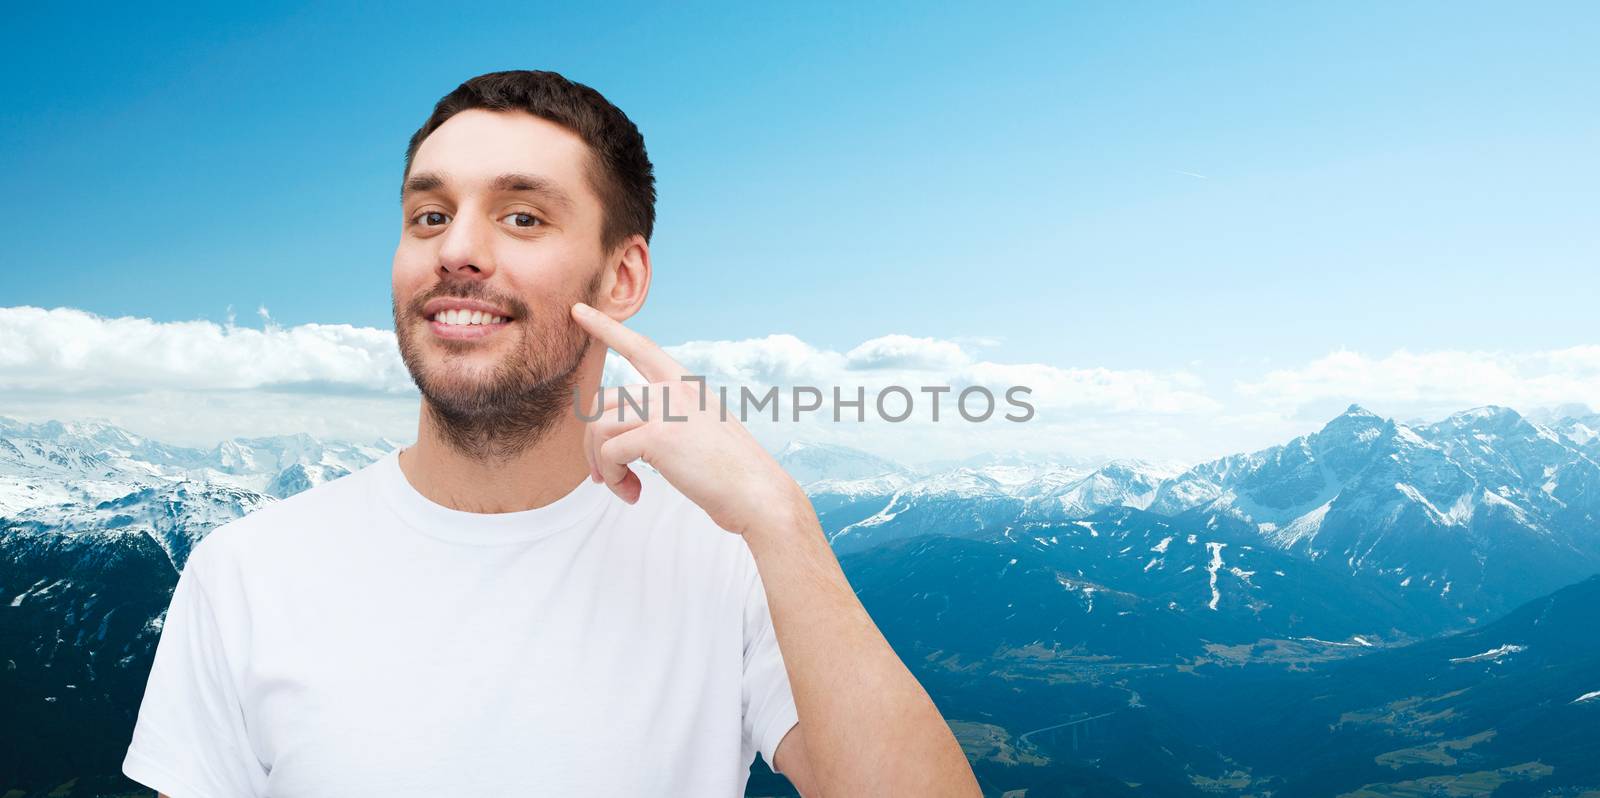 health and beauty concept - smiling young handsome man pointing to cheek